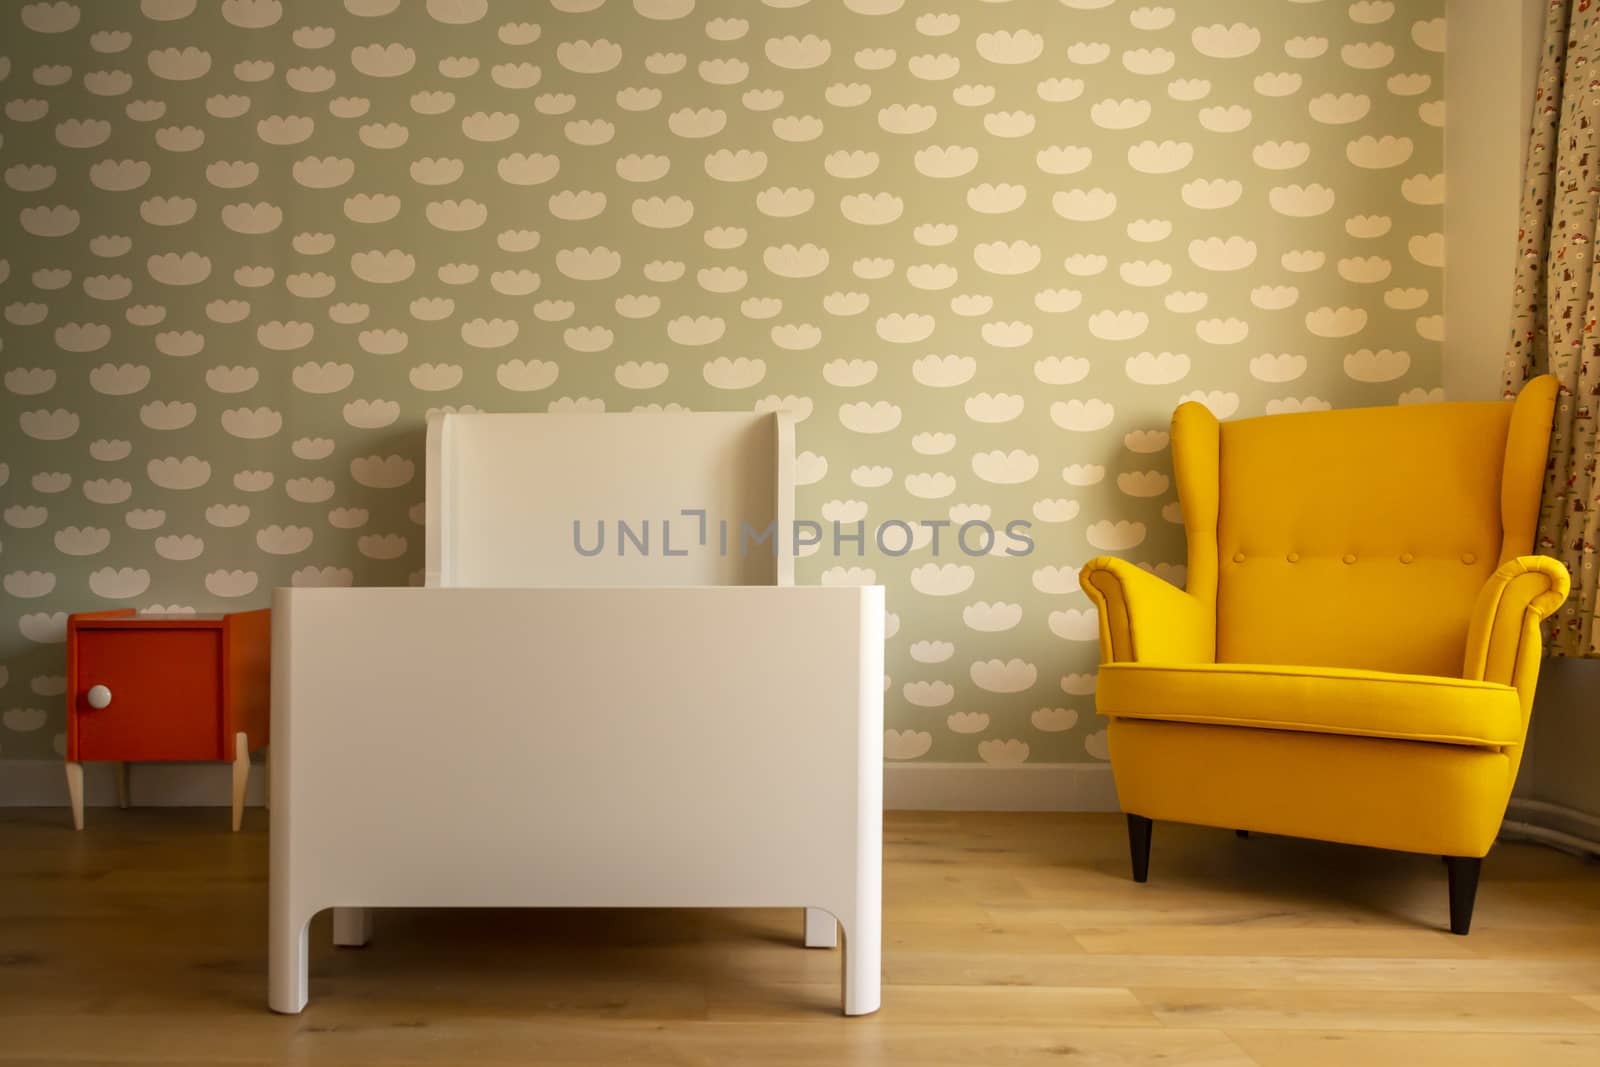 Toddler boy's sleeping room, with cloud pattern on wall, vintage chair, wooden floor and orange bedside table. Vintage look.